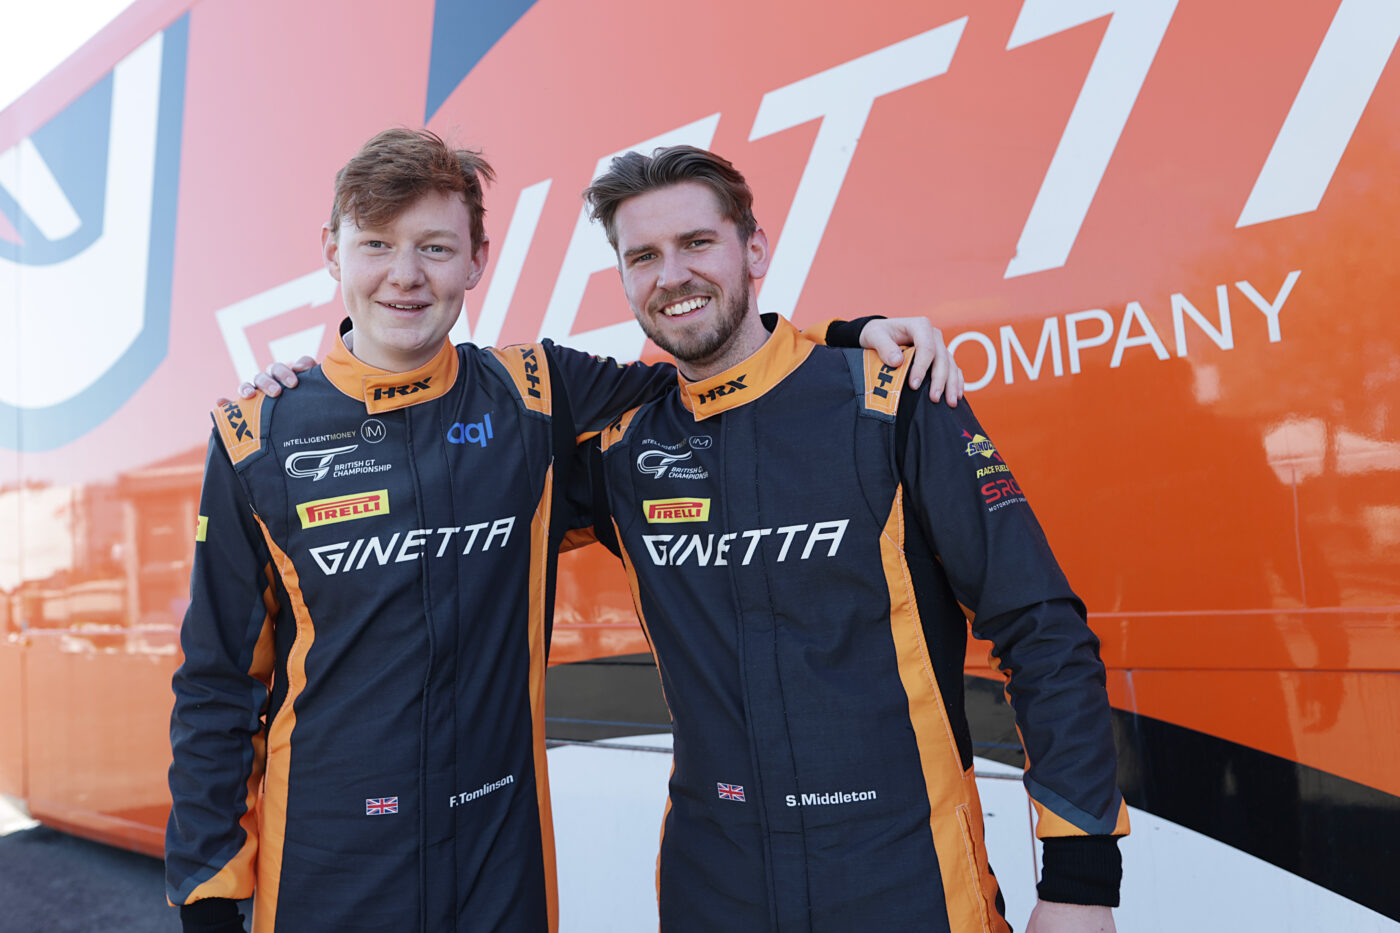 Tomlinson and Middleton Look to Resolve Unfinished Business at Upcoming Silverstone 500